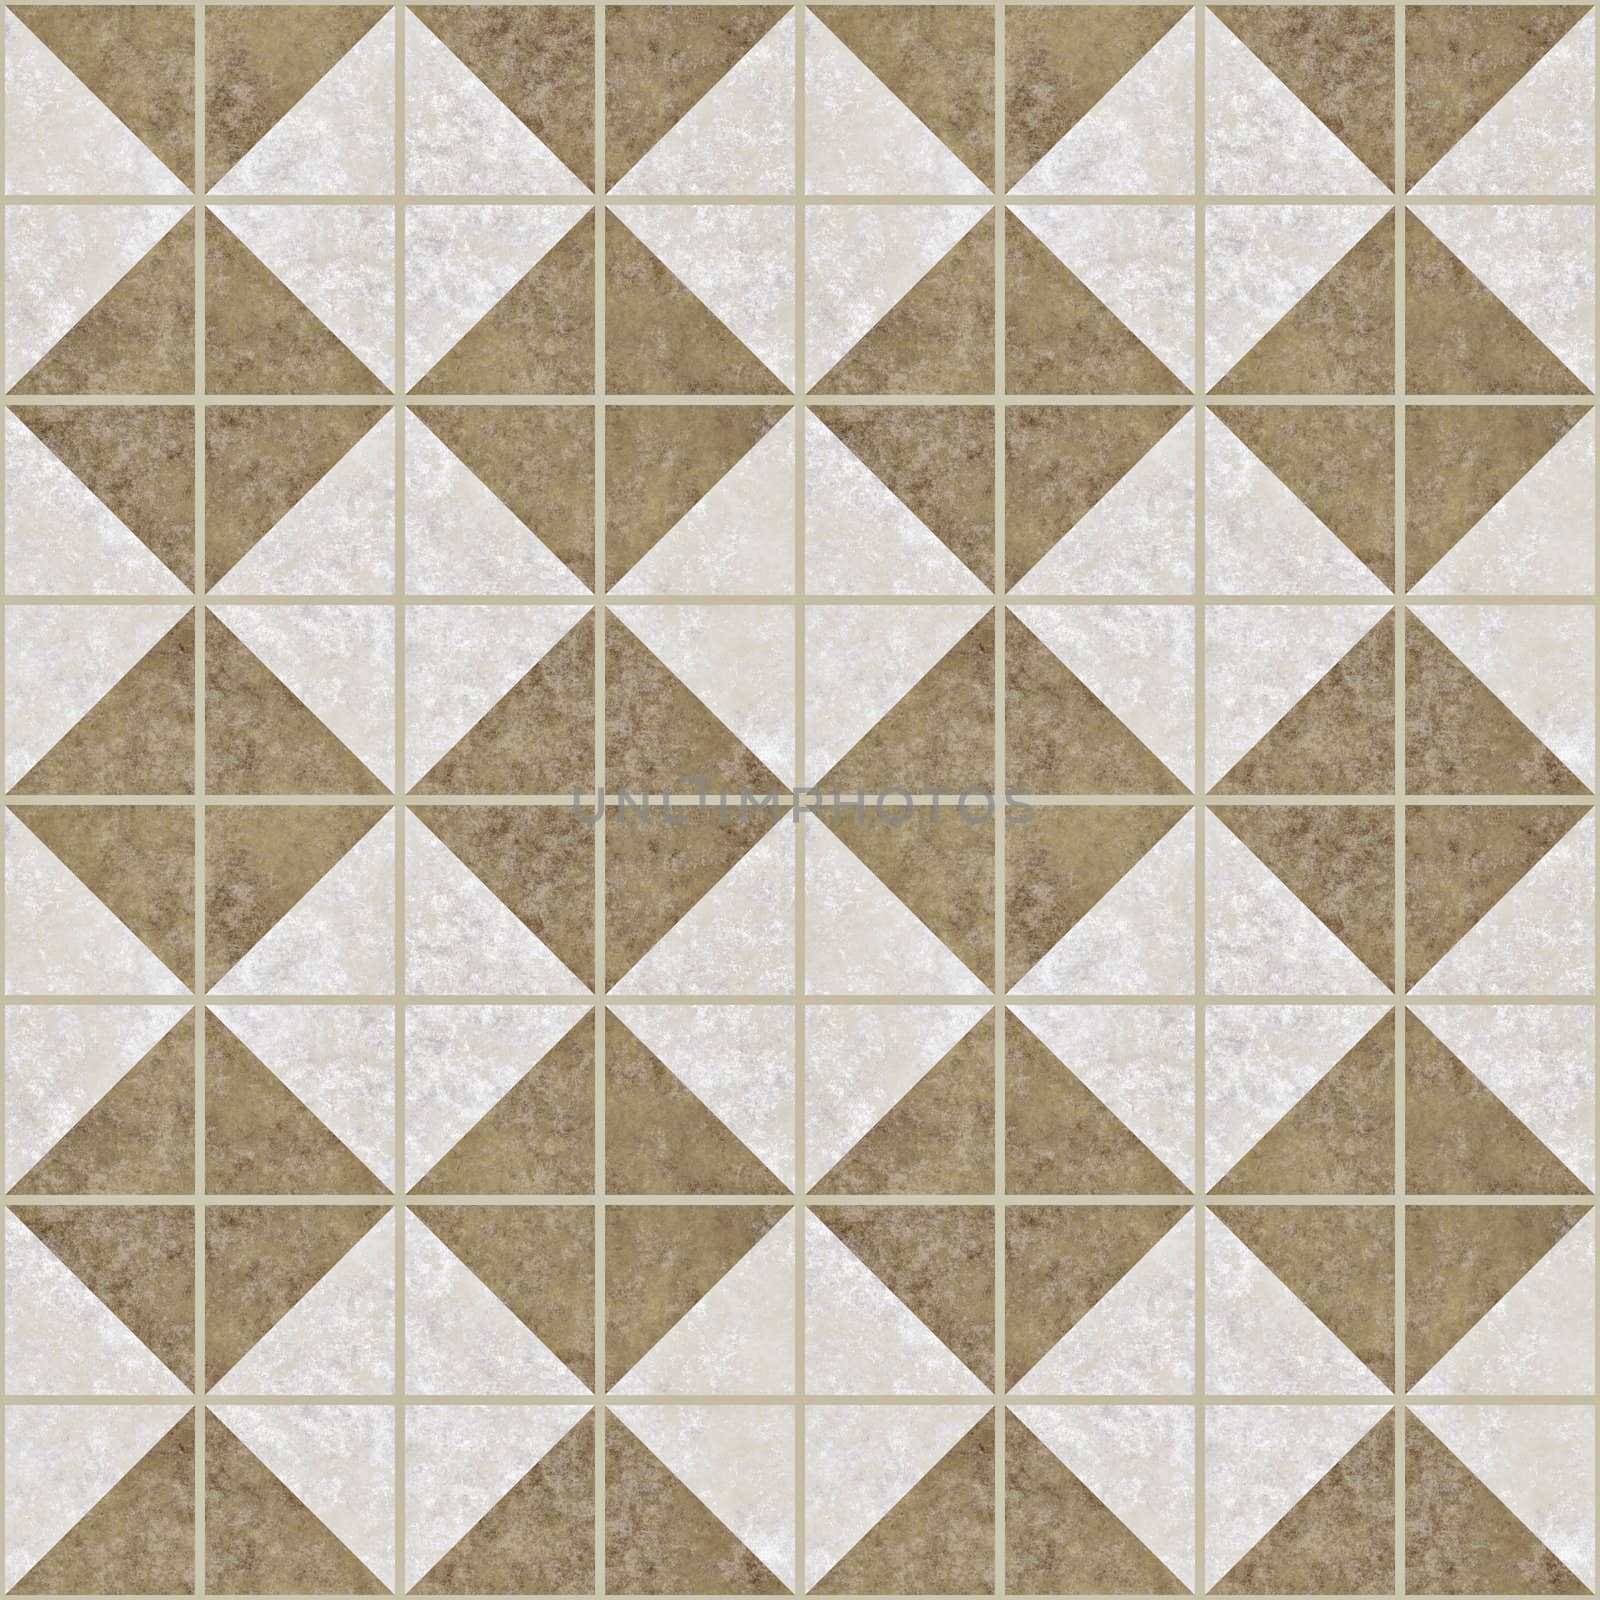 a large image of marble stone floor tiles